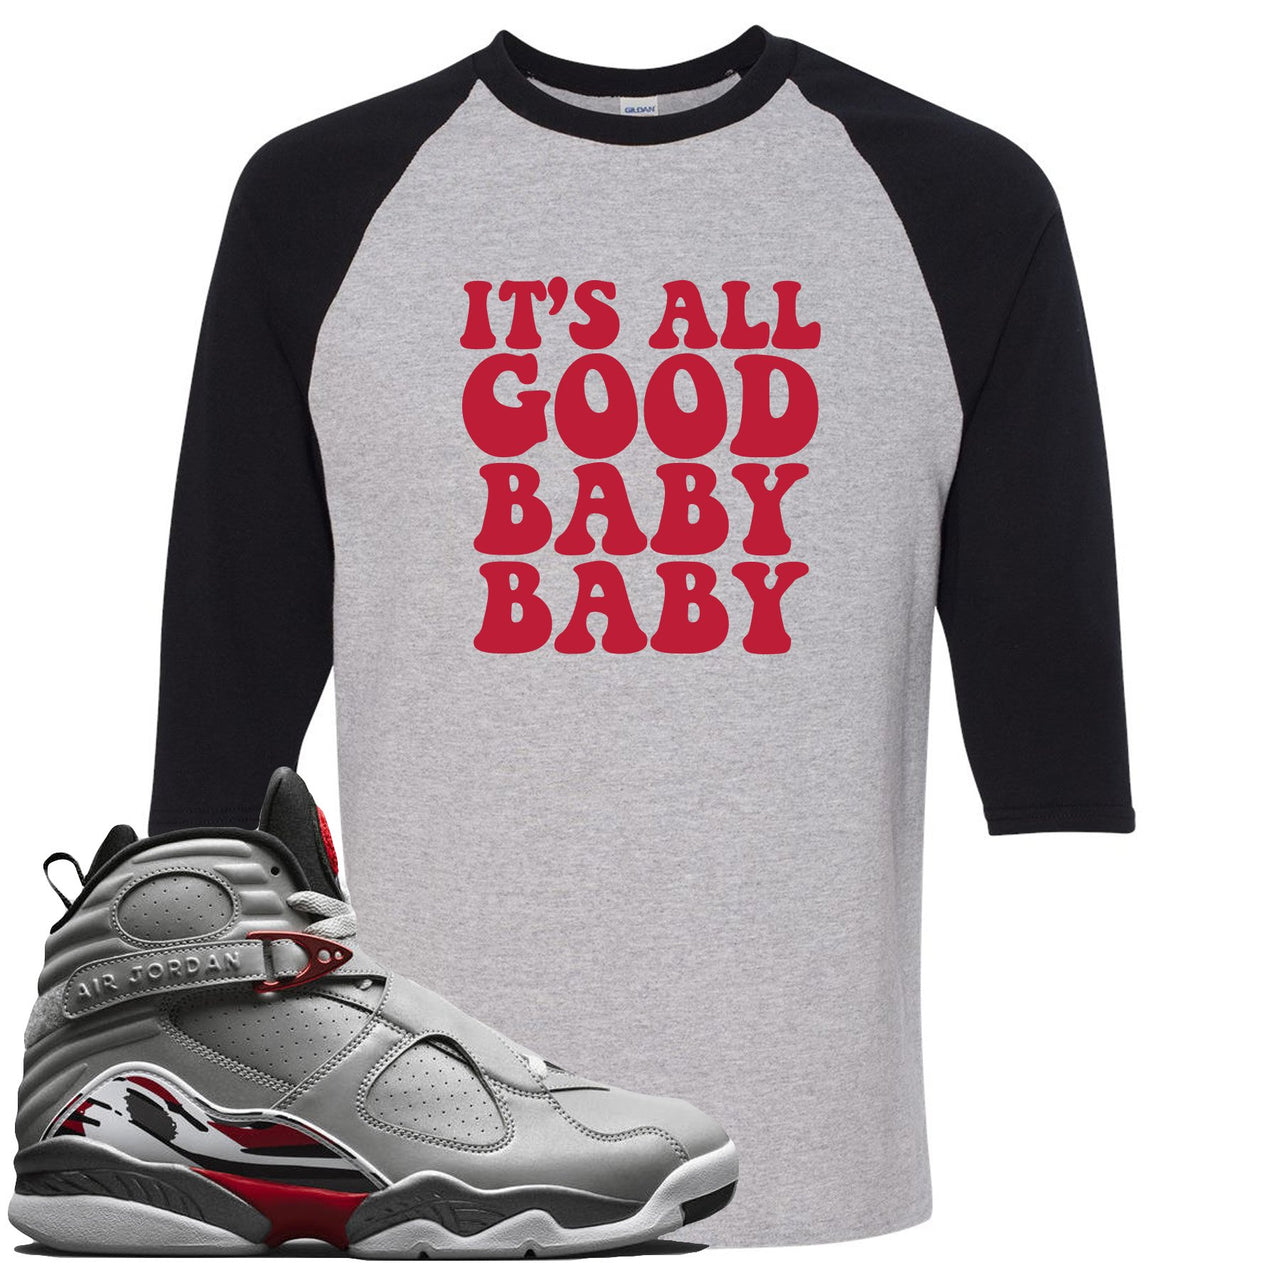 Reflections of a Champion 8s Raglan T Shirt | It's All Good Baby Baby, Sports Gray and Black